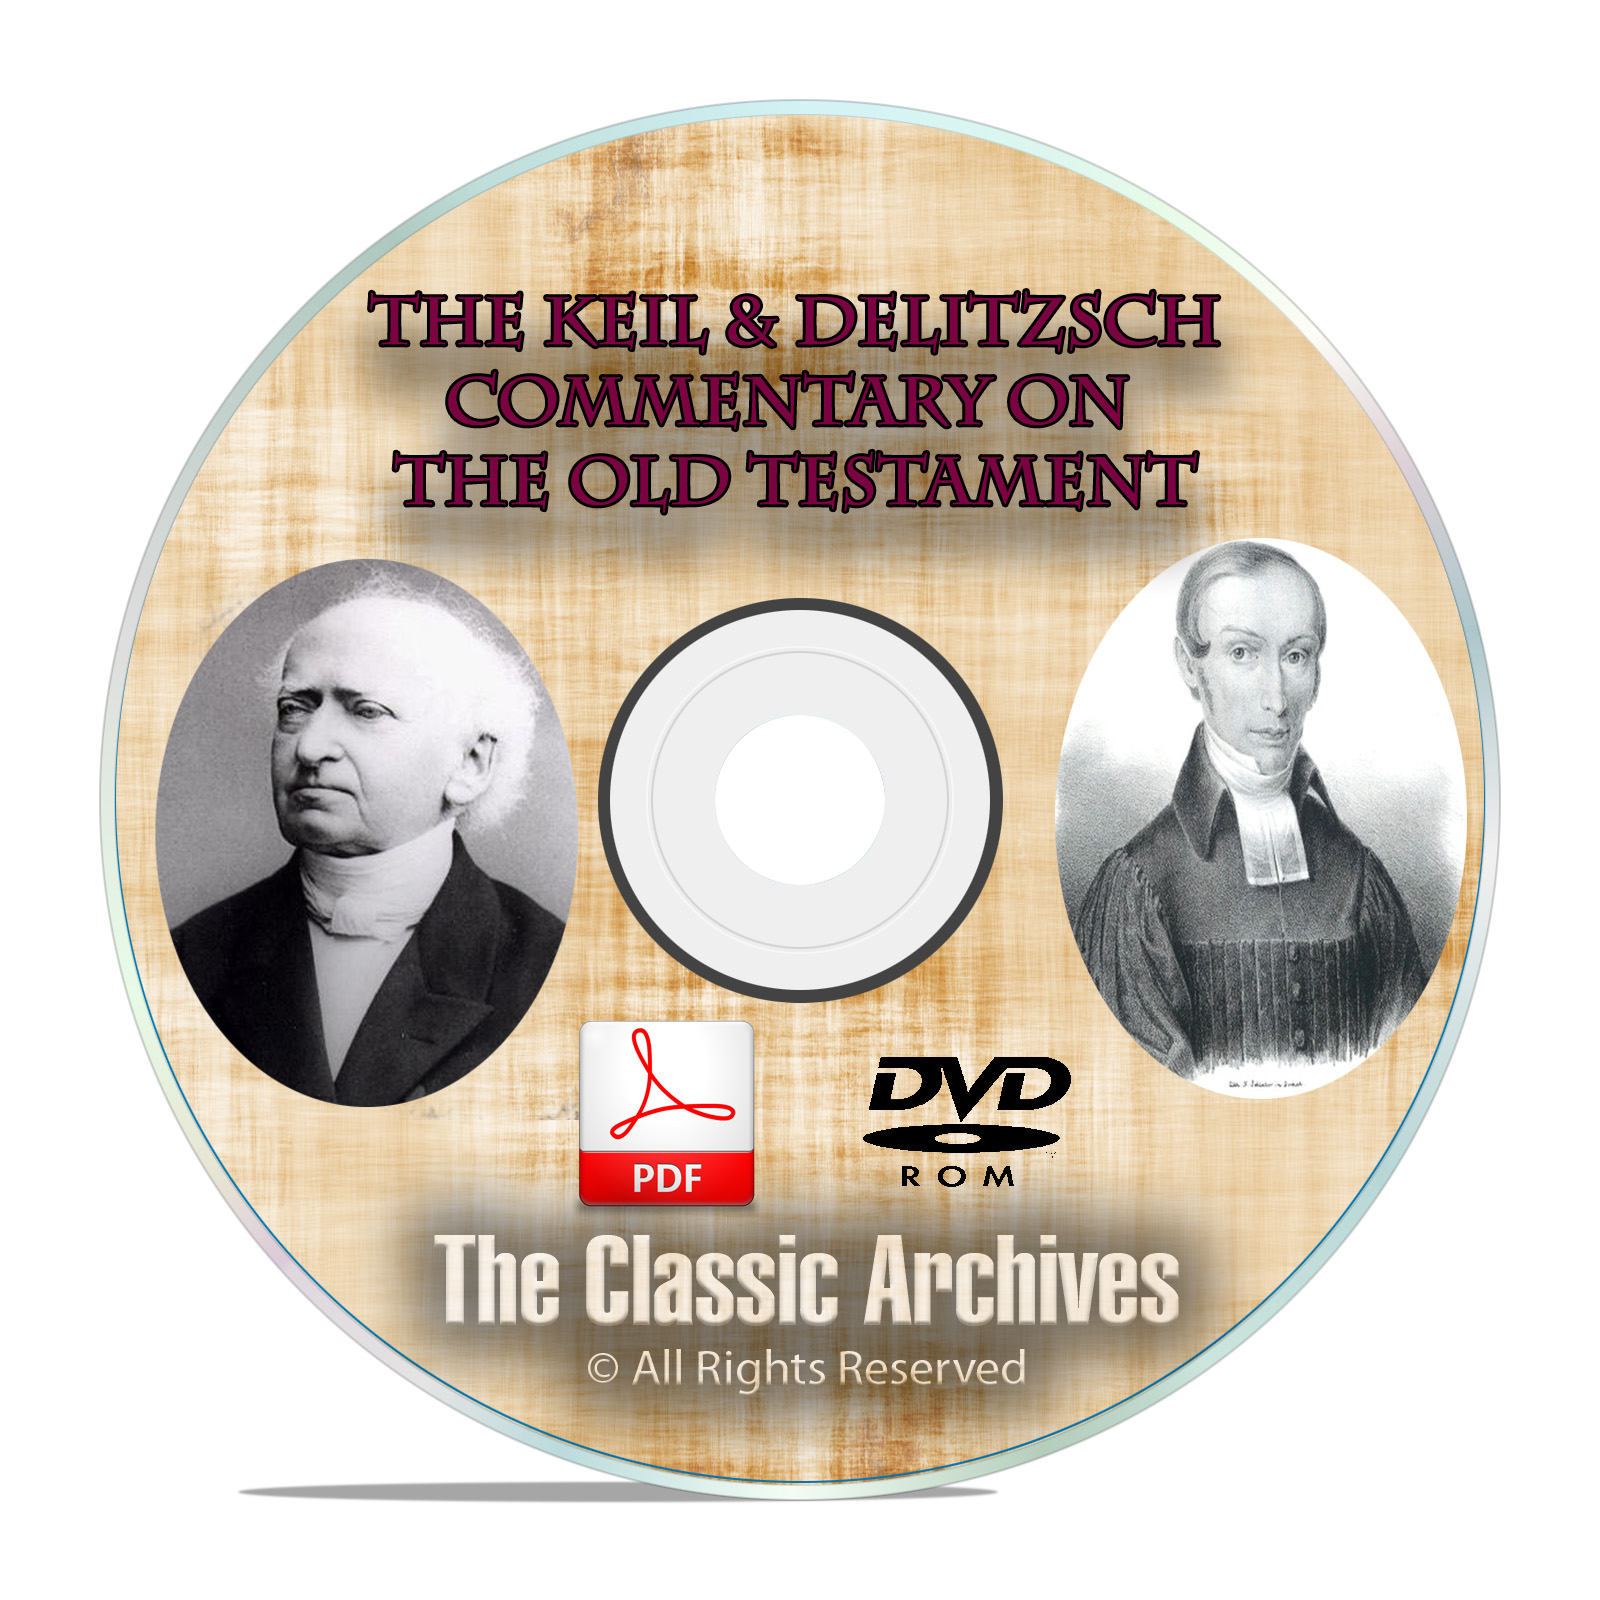 Keil & Delitzsch Commentary on Old Testament, Christian Bible Study DVD-ROM